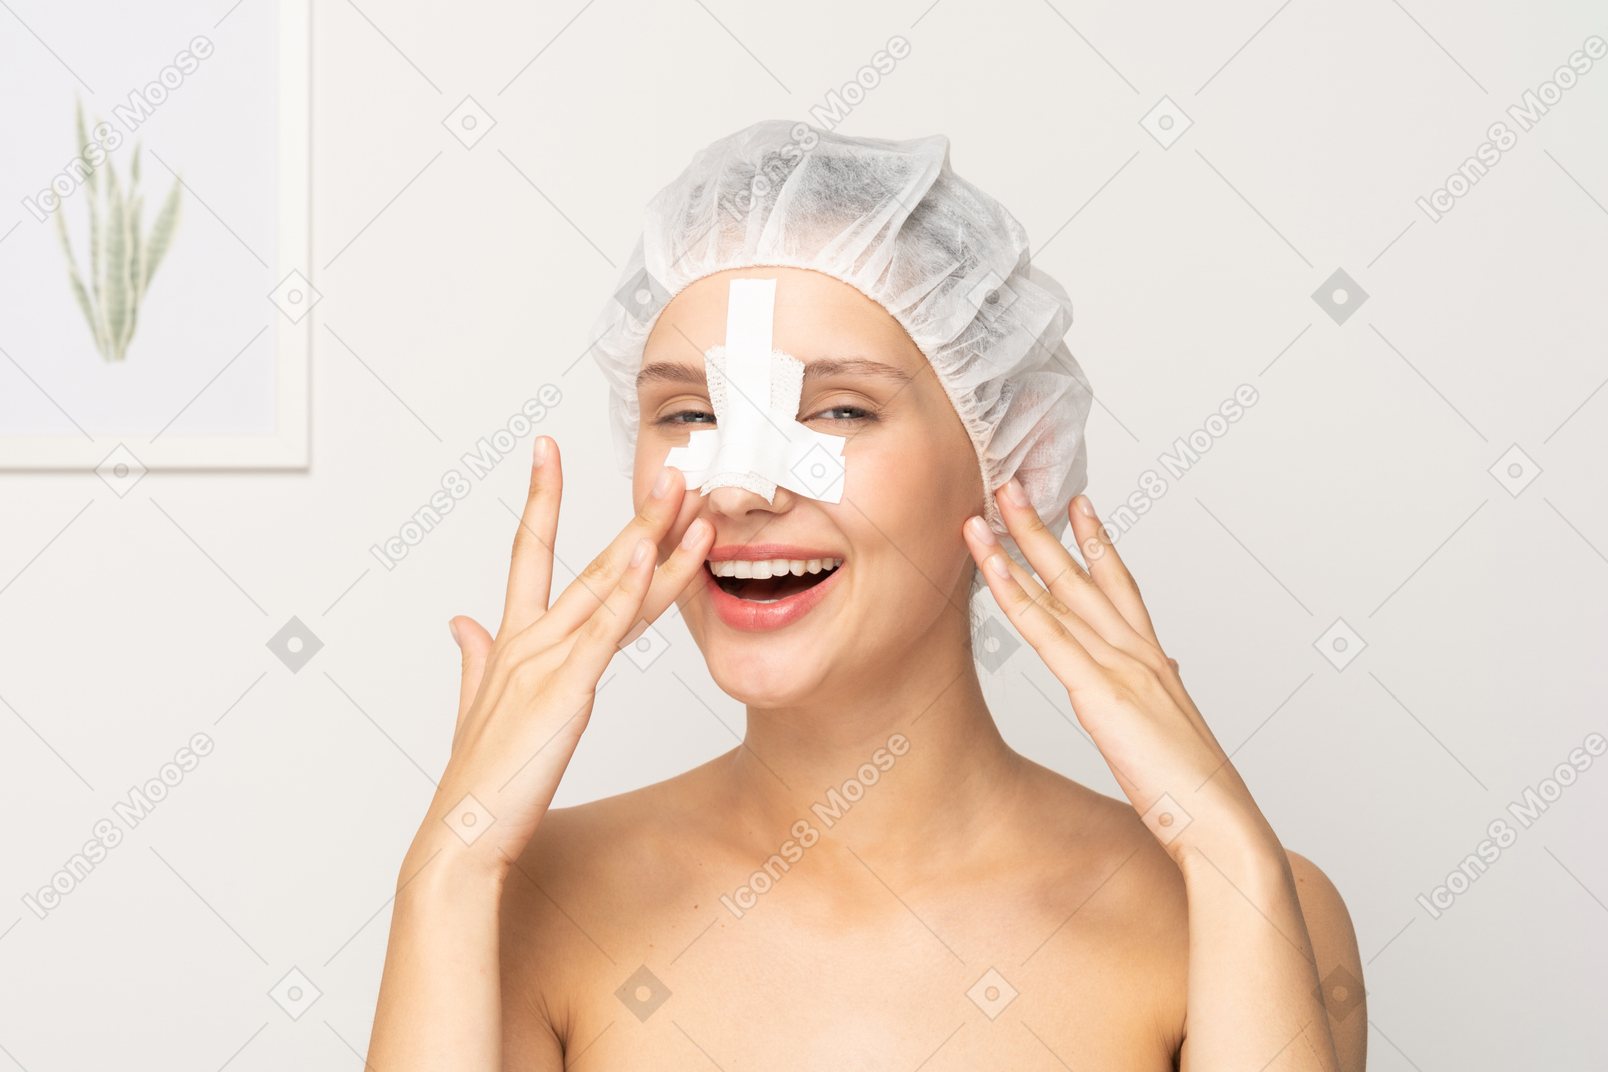 Portrait of smiling woman with bandage on her nose after plastic surgery